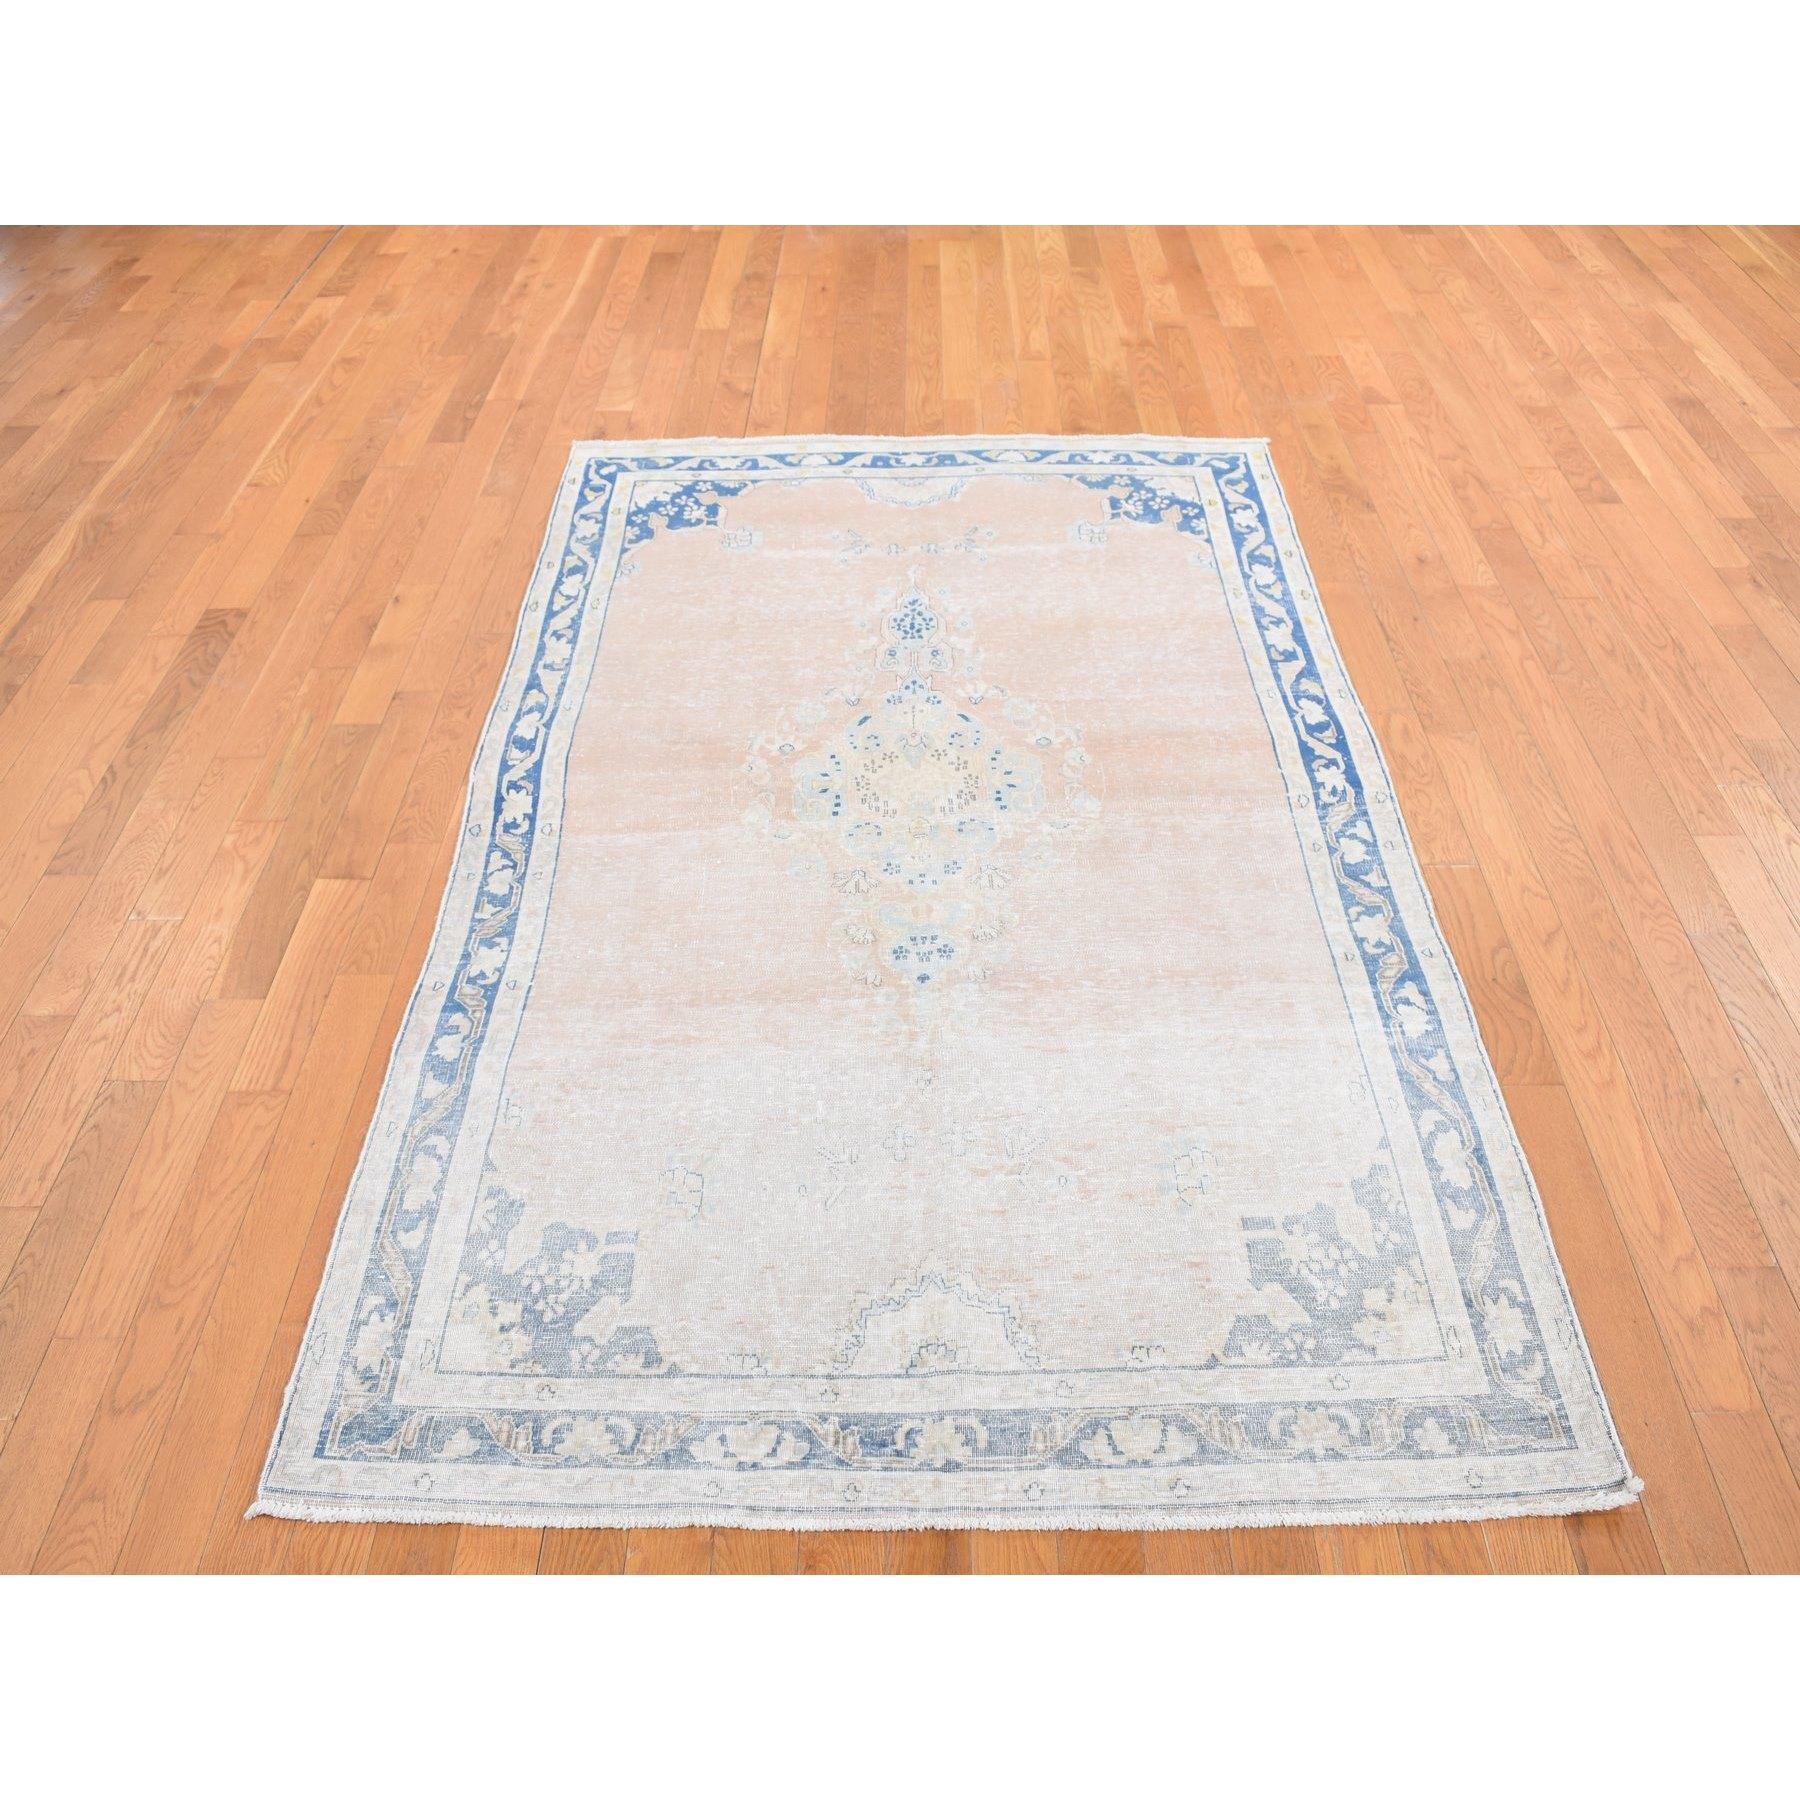 This fabulous Hand-Knotted carpet has been created and designed for extra strength and durability. This rug has been handcrafted for weeks in the traditional method that is used to make
Exact Rug Size in Feet and Inches : 4'7